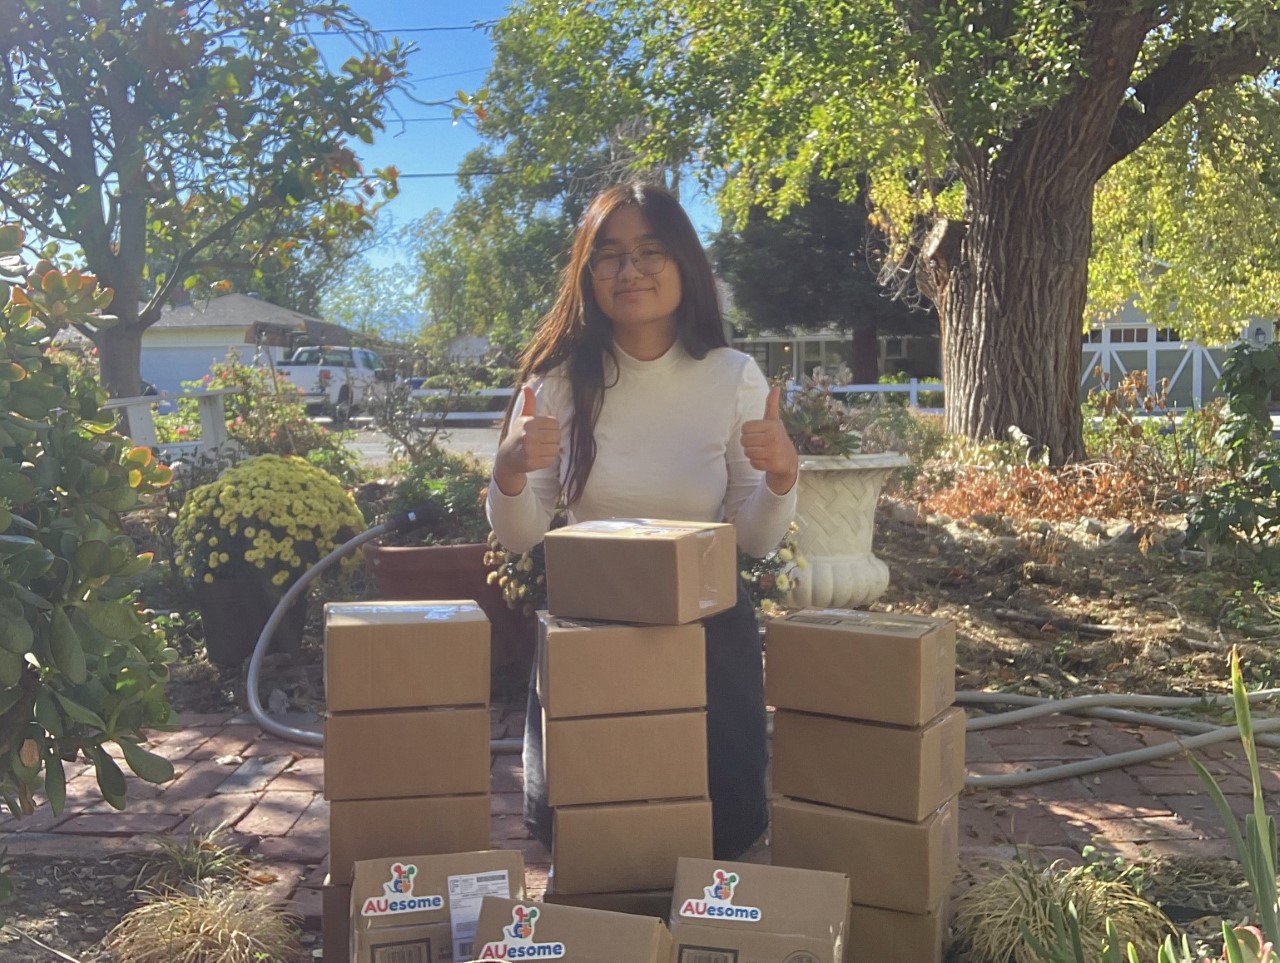 Anne standing with AUesome therapy kits in small cardboard boxes